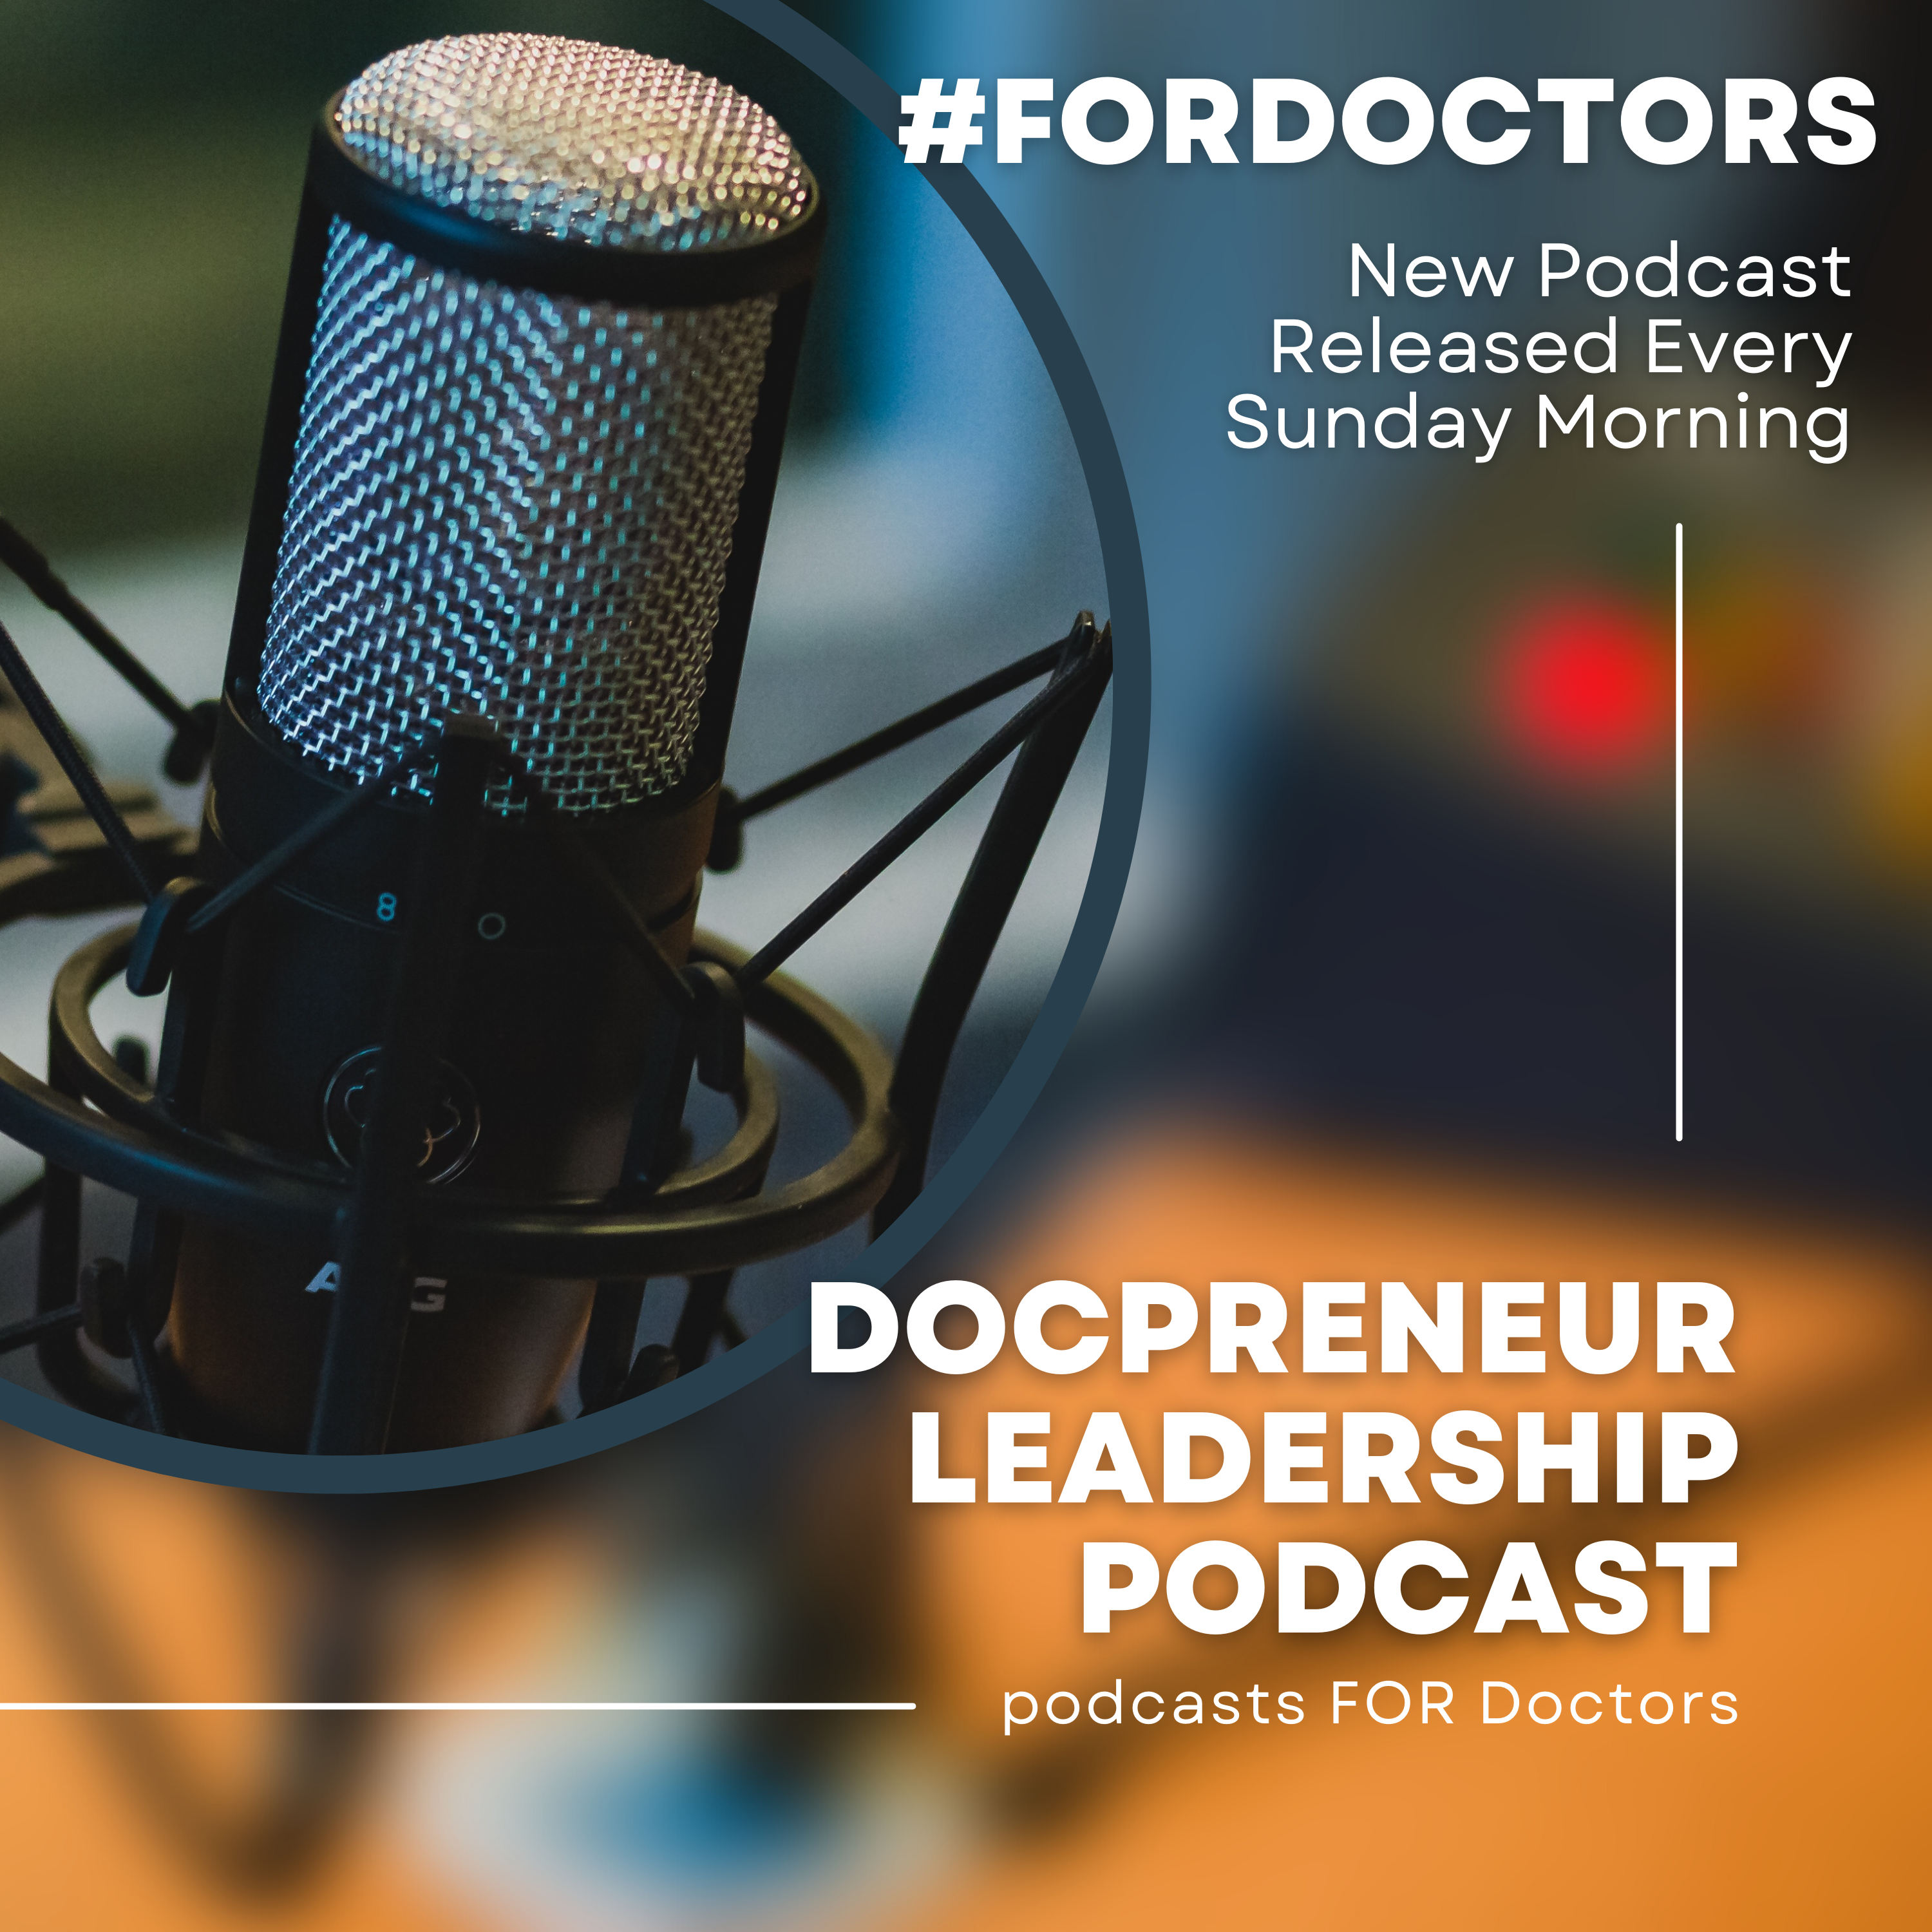 (Podcast) When Hospitals and Surgeons Collaborate …